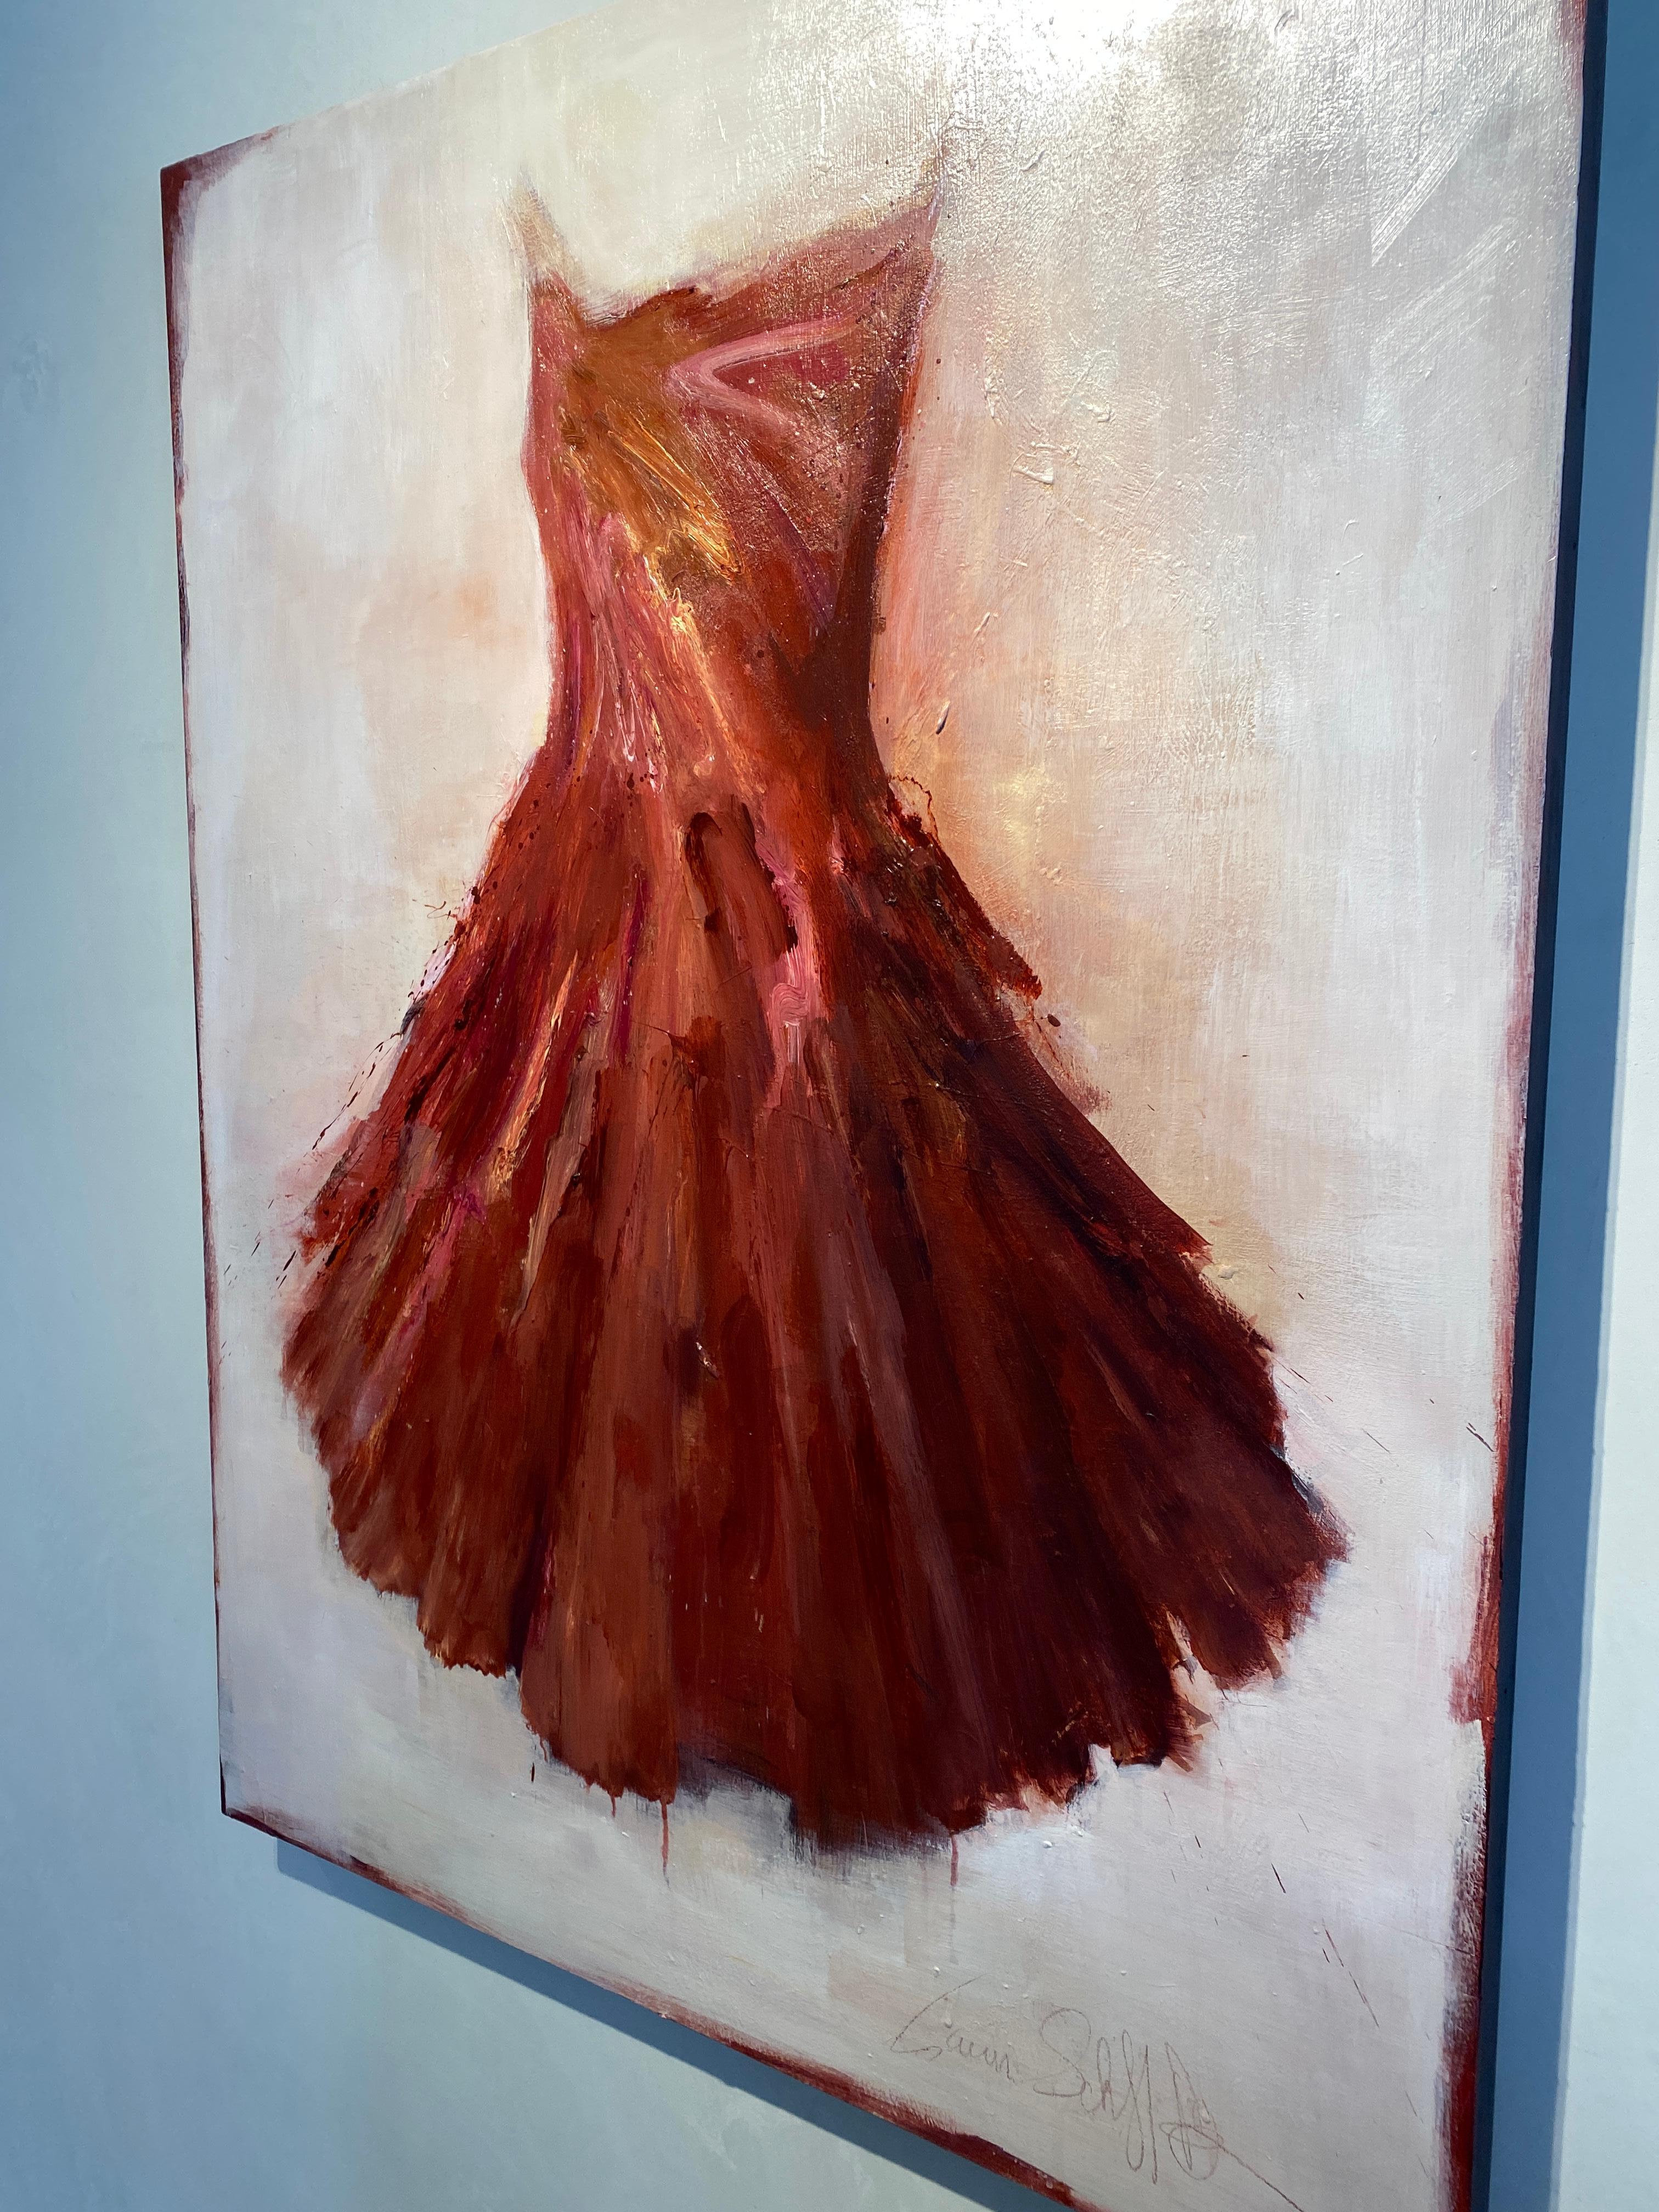 This acrylic on panel painting in exuberant red is lushly painted and demonstrates Laura Schiff Bean's unique view of dresses.  

Influenced by Jim Dine, Bean's dresses are her focus and the gestural drips and loose brush strokes make each painting